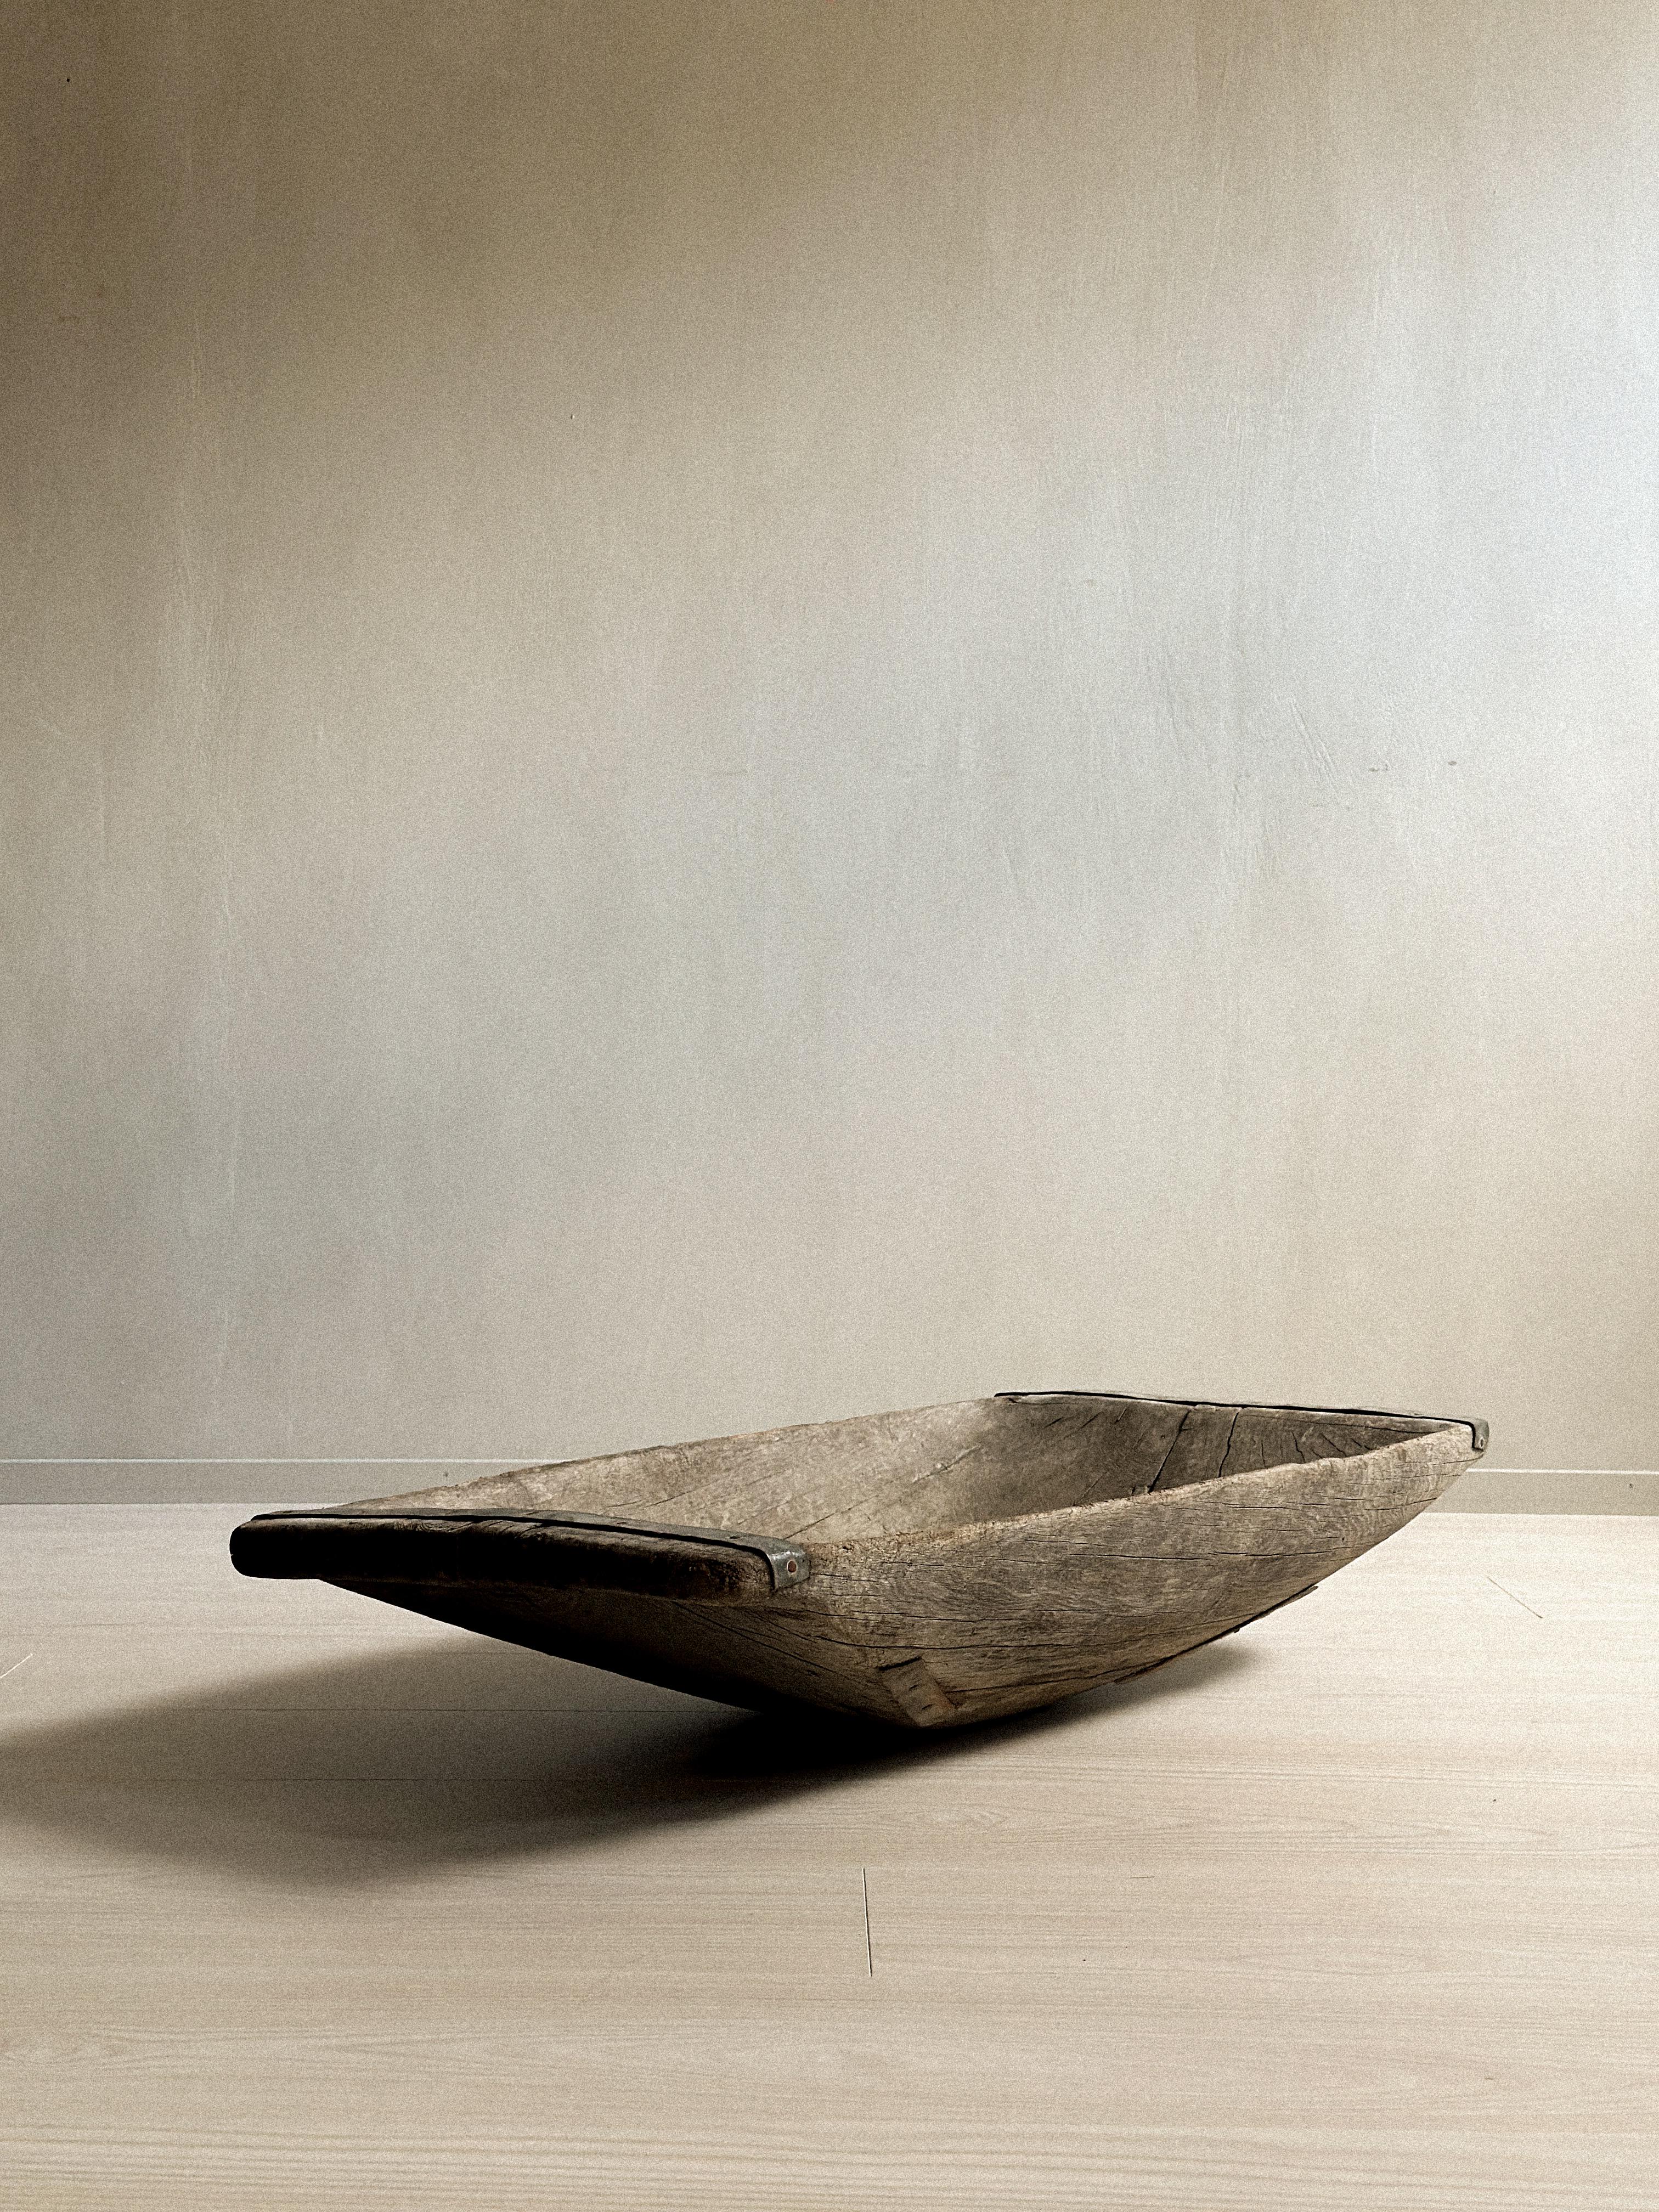 A Large Antique Wabi Sabi Wooden Tray, Scandinavia c. 1800s  In Good Condition For Sale In Hønefoss, 30